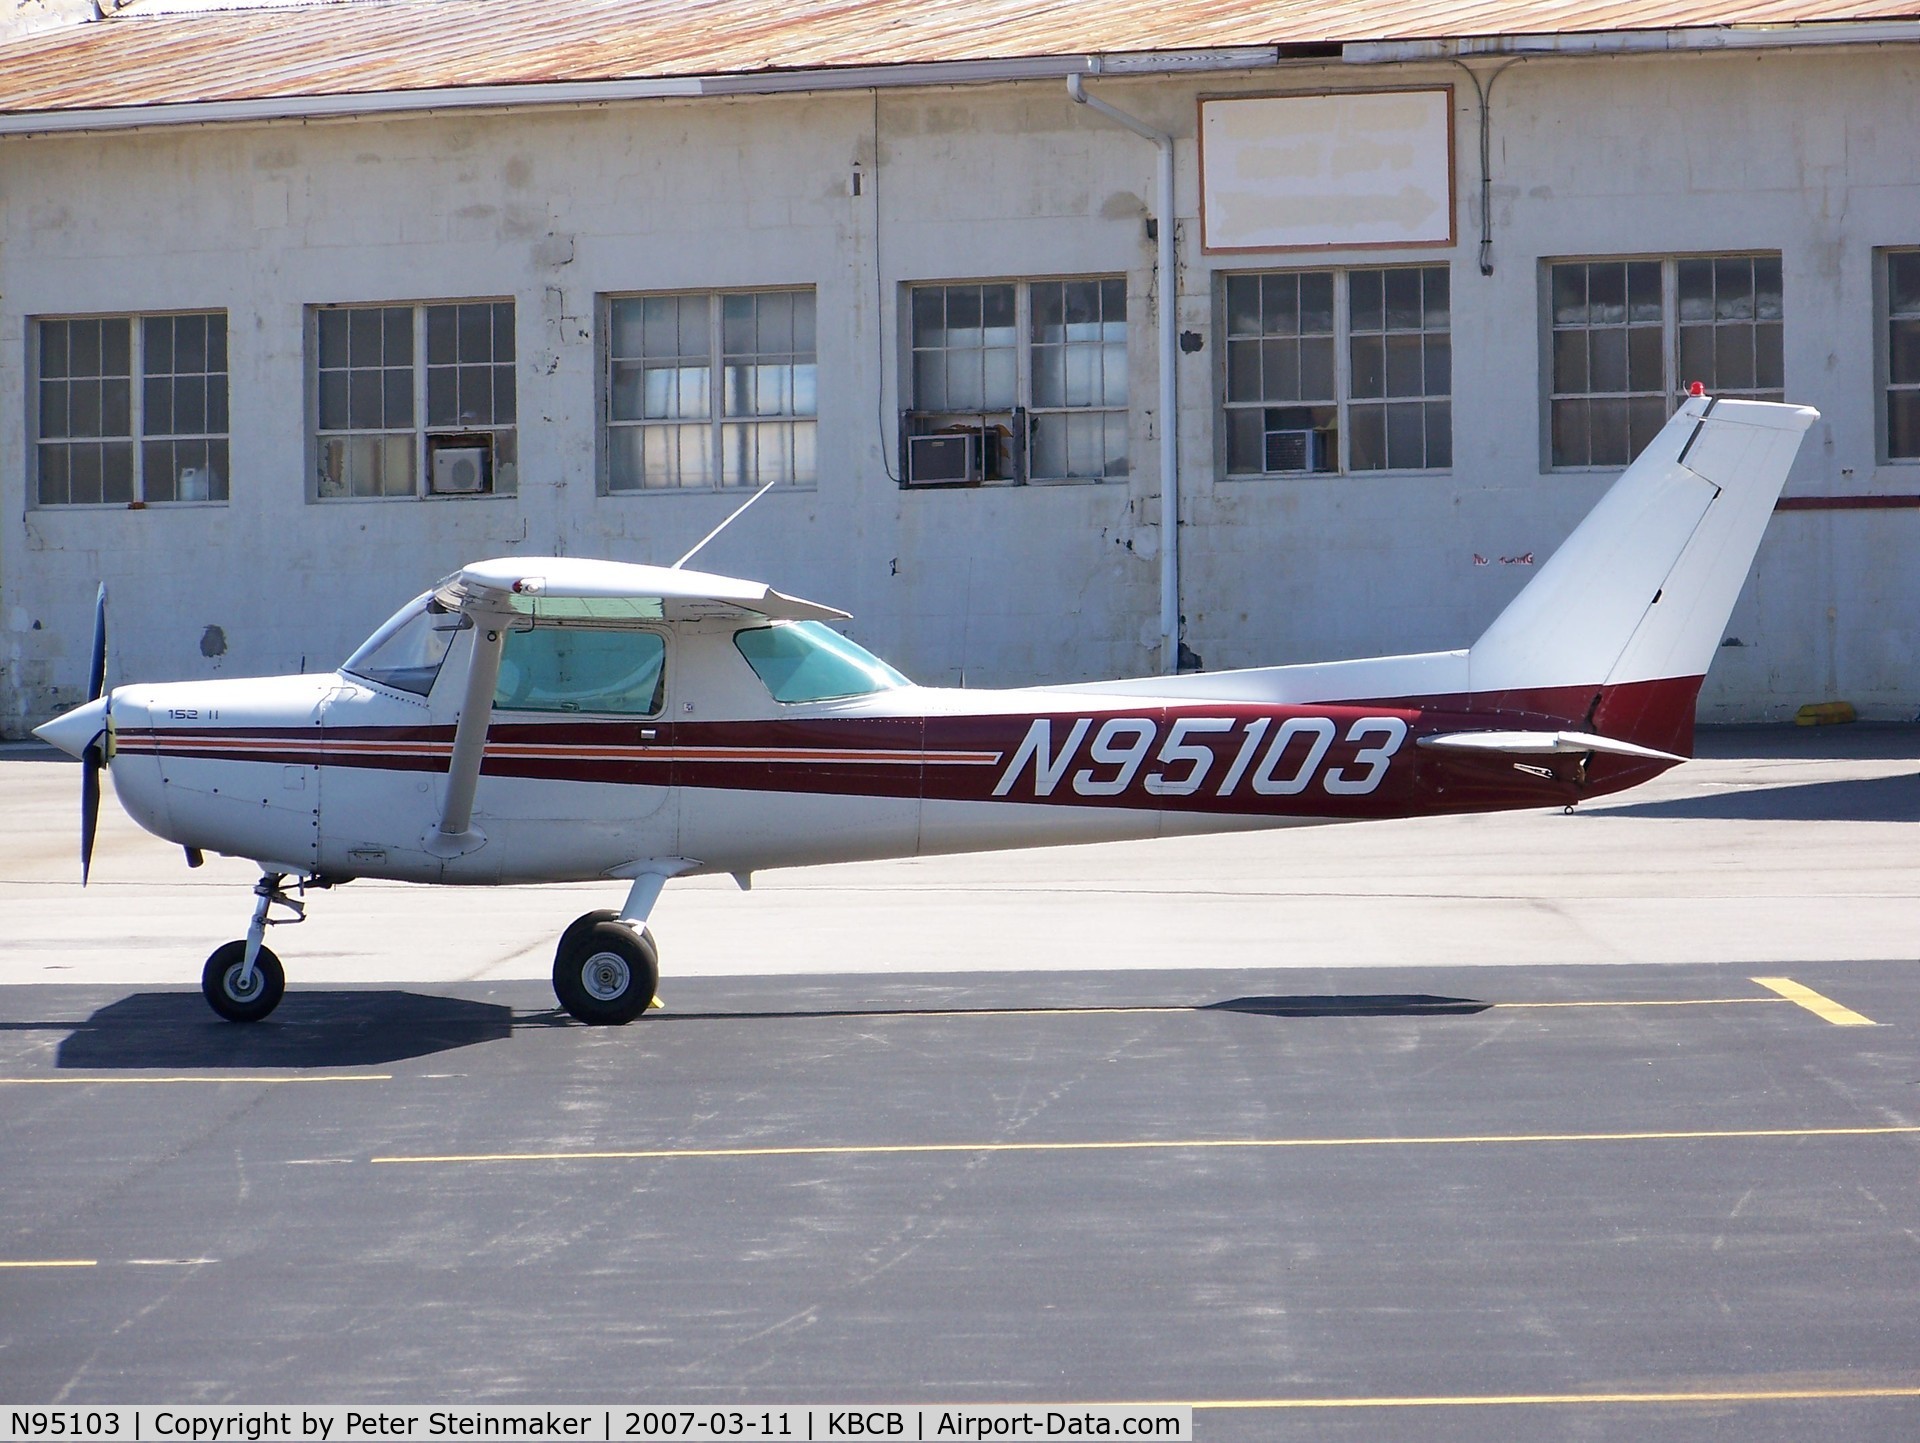 N95103, 1984 Cessna 152 C/N 15285849, Parked on the ramp awaiting her next student.